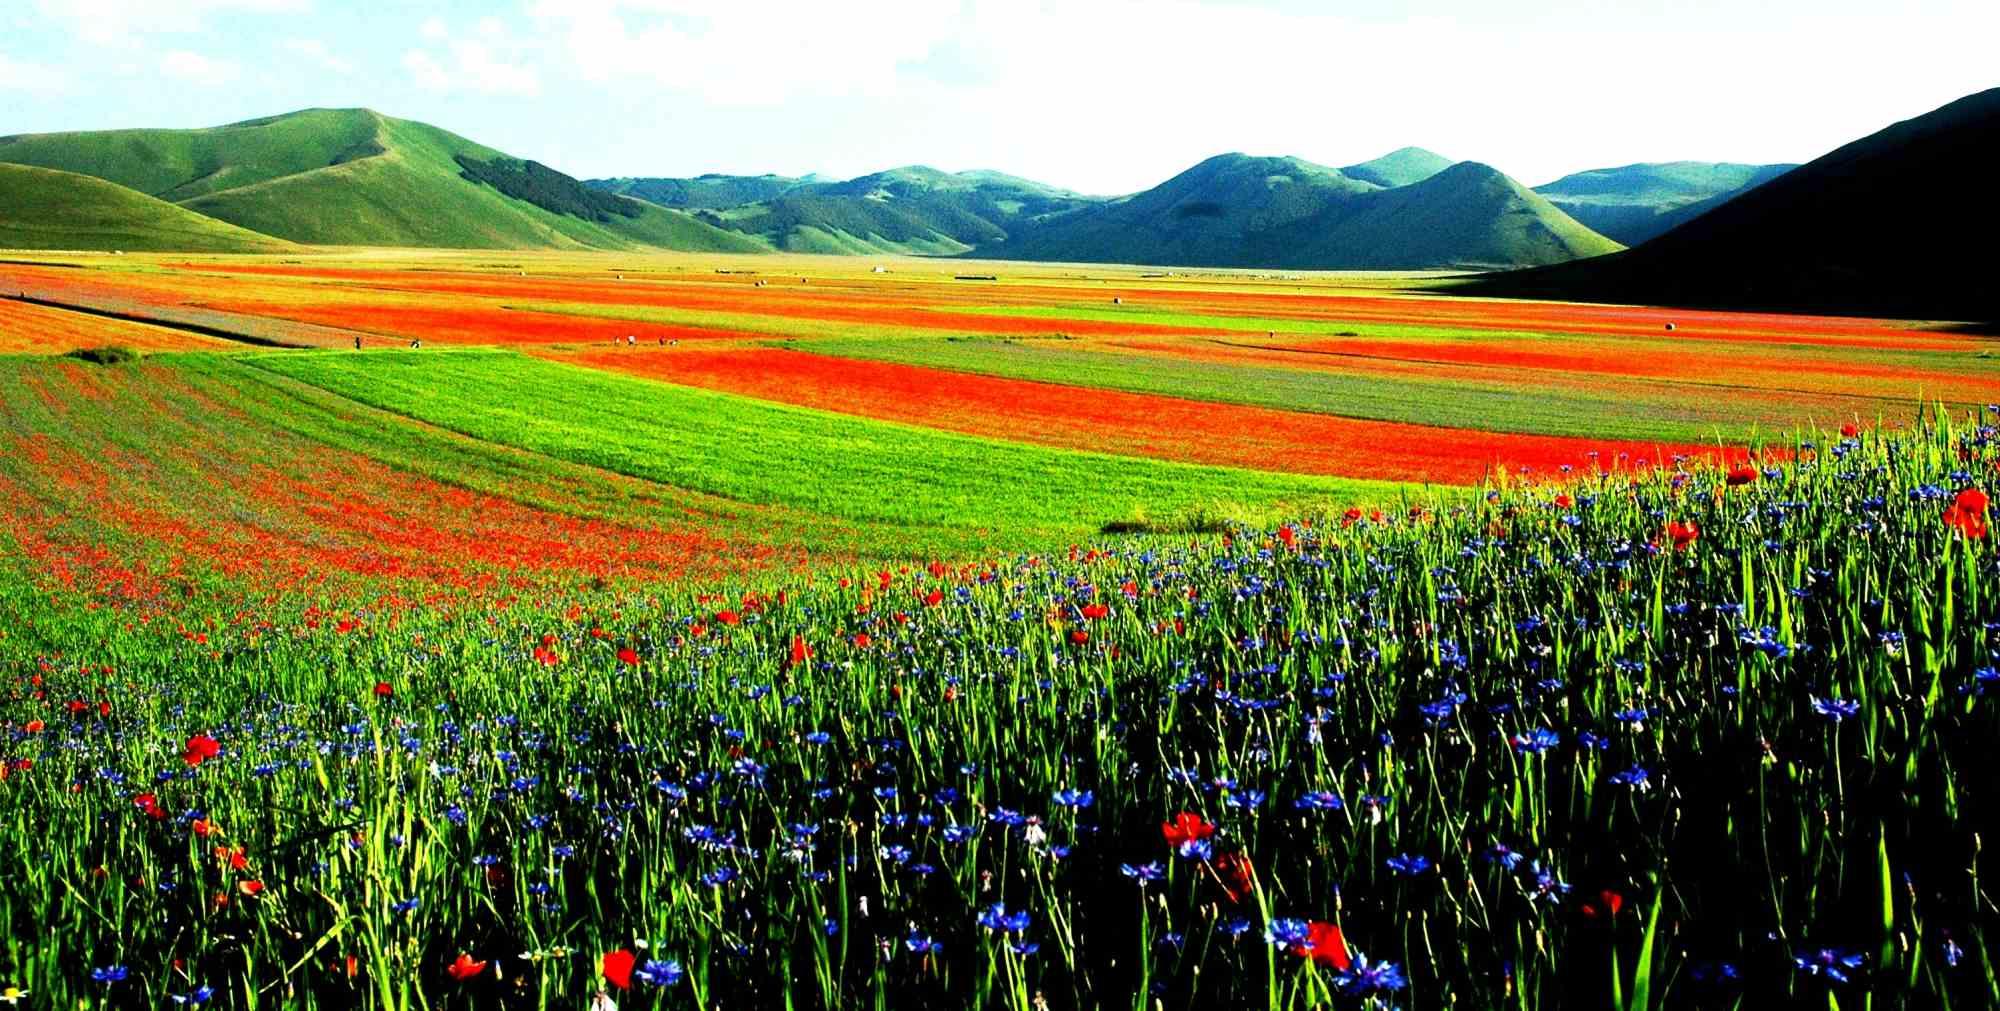 Skimming is one of the best photo on canvas realized by Giuseppe Marani in 2010.

Always passionate about landscapes and photography, the artist then devoted himself to landscaping. He greatly admires the beauty of the landscapes of Castelluccio di